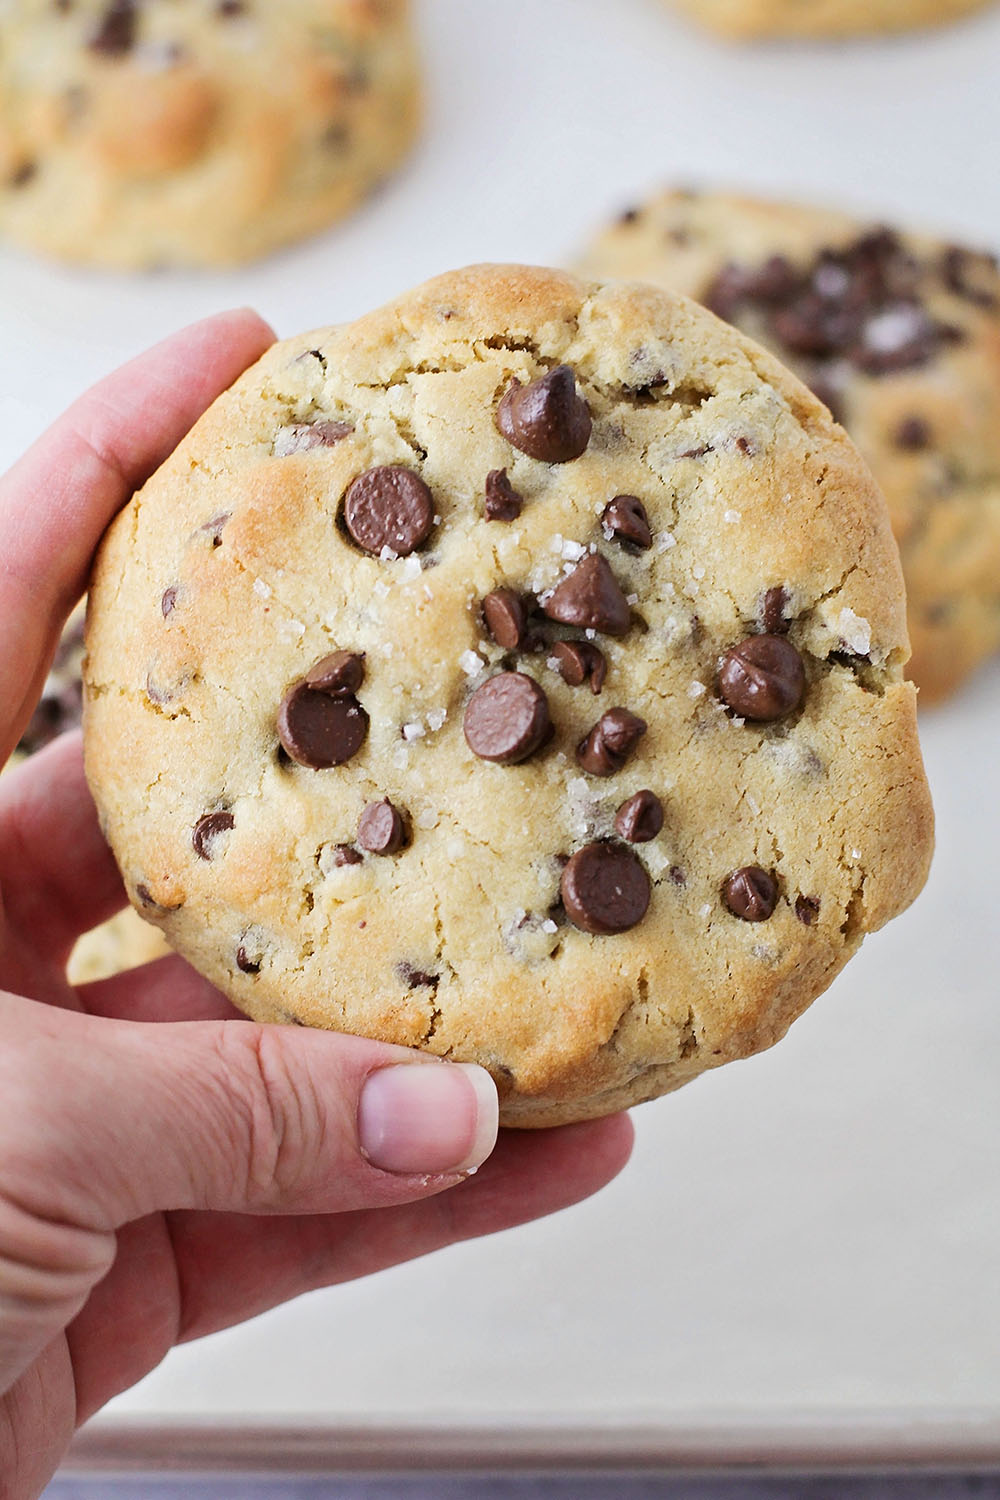 These jumbo chocolate chip cookies taste just as amazing as the ones from the gourmet cookie shops, but they're so easy to make at home!